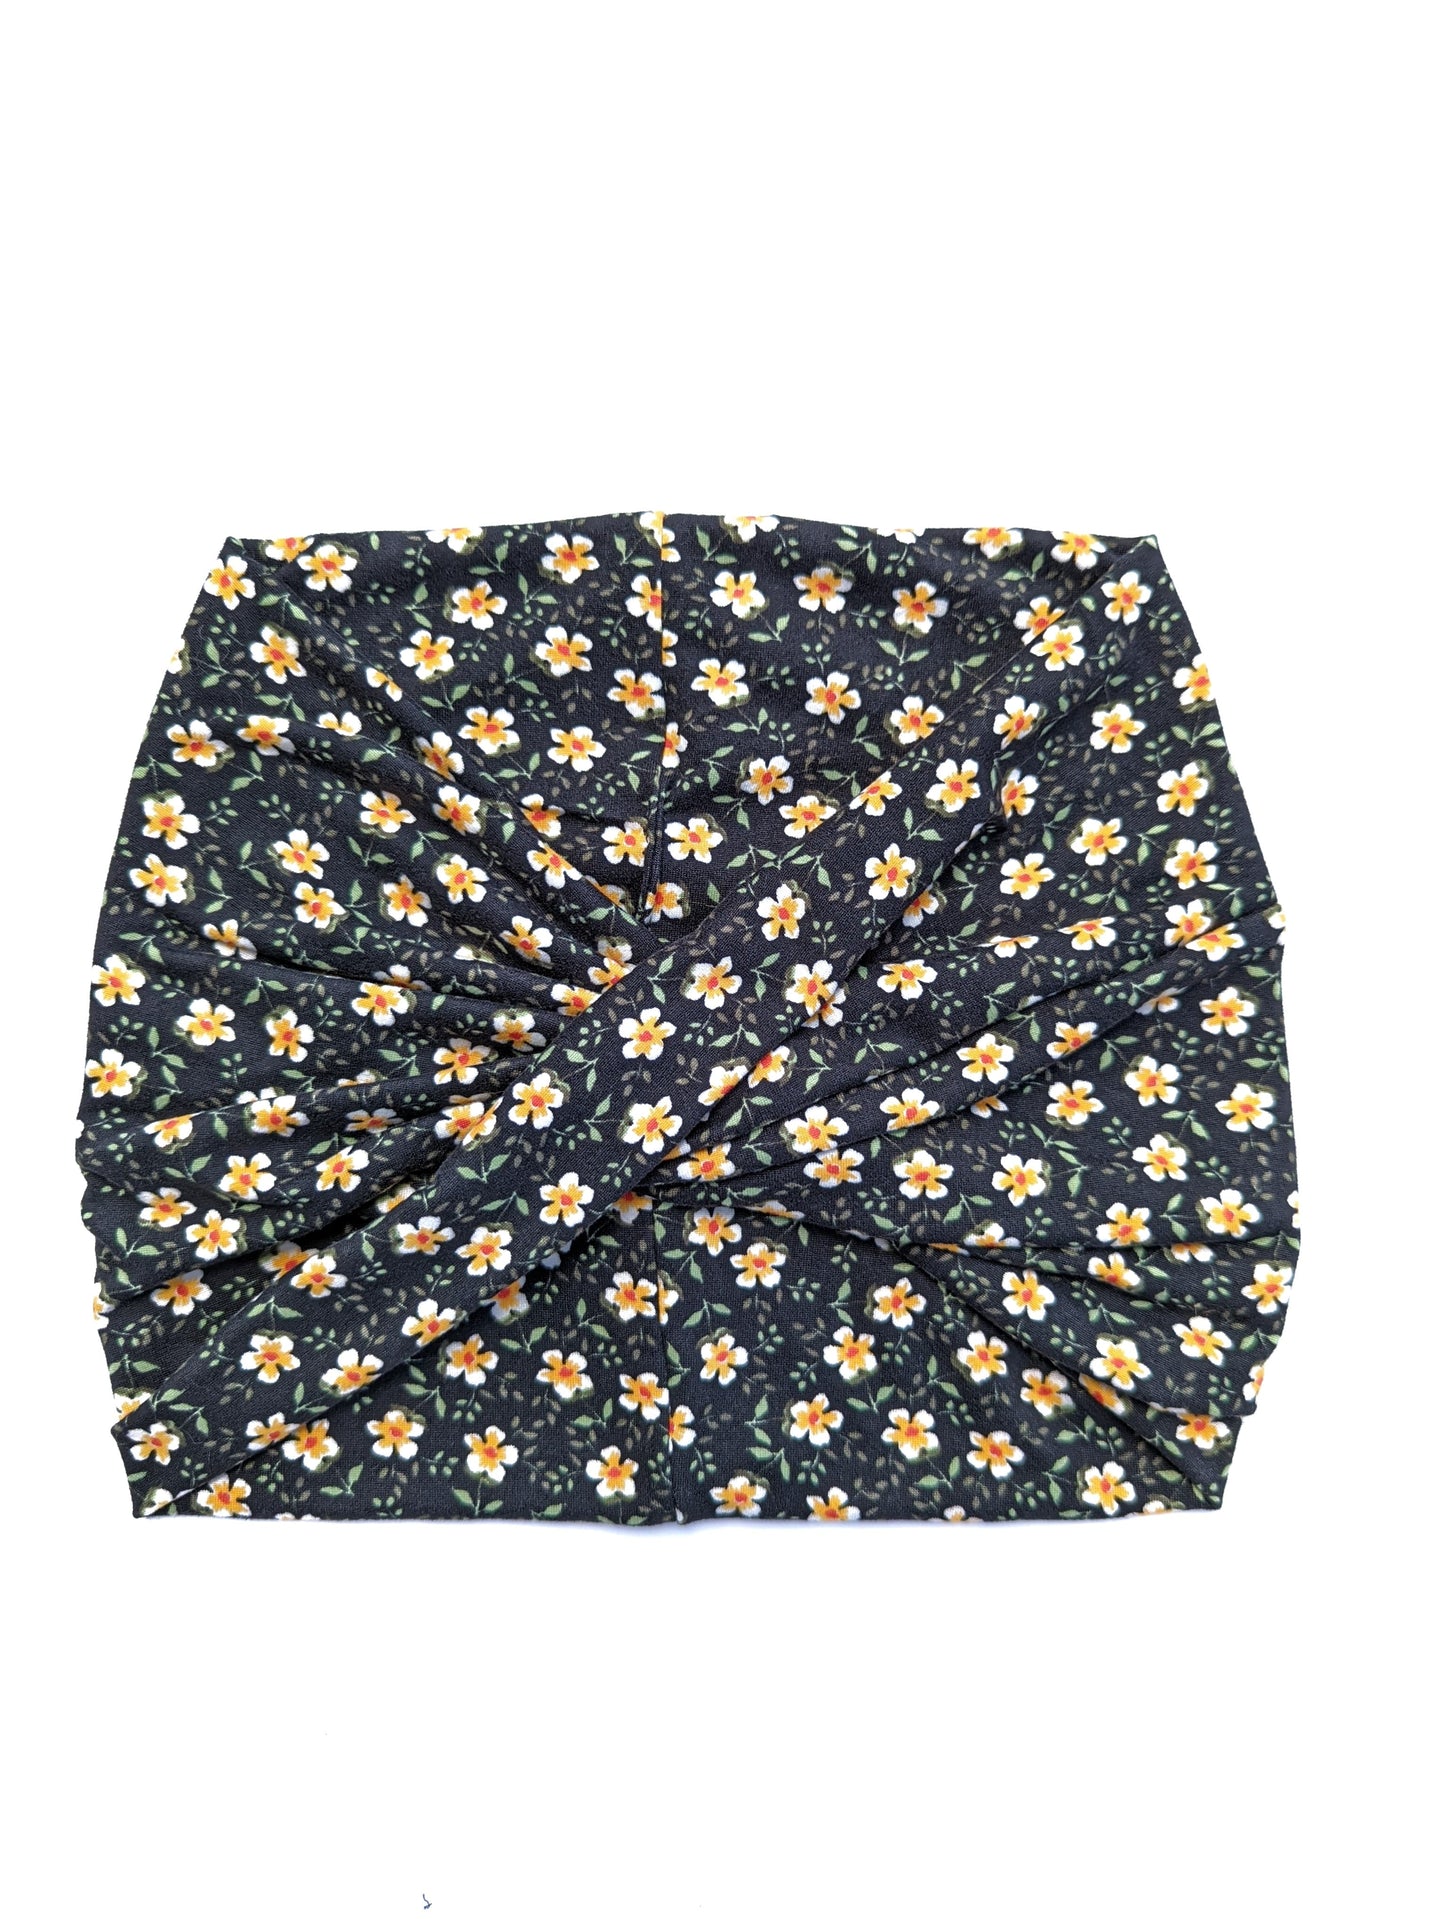 Ditzy Floral wide headband